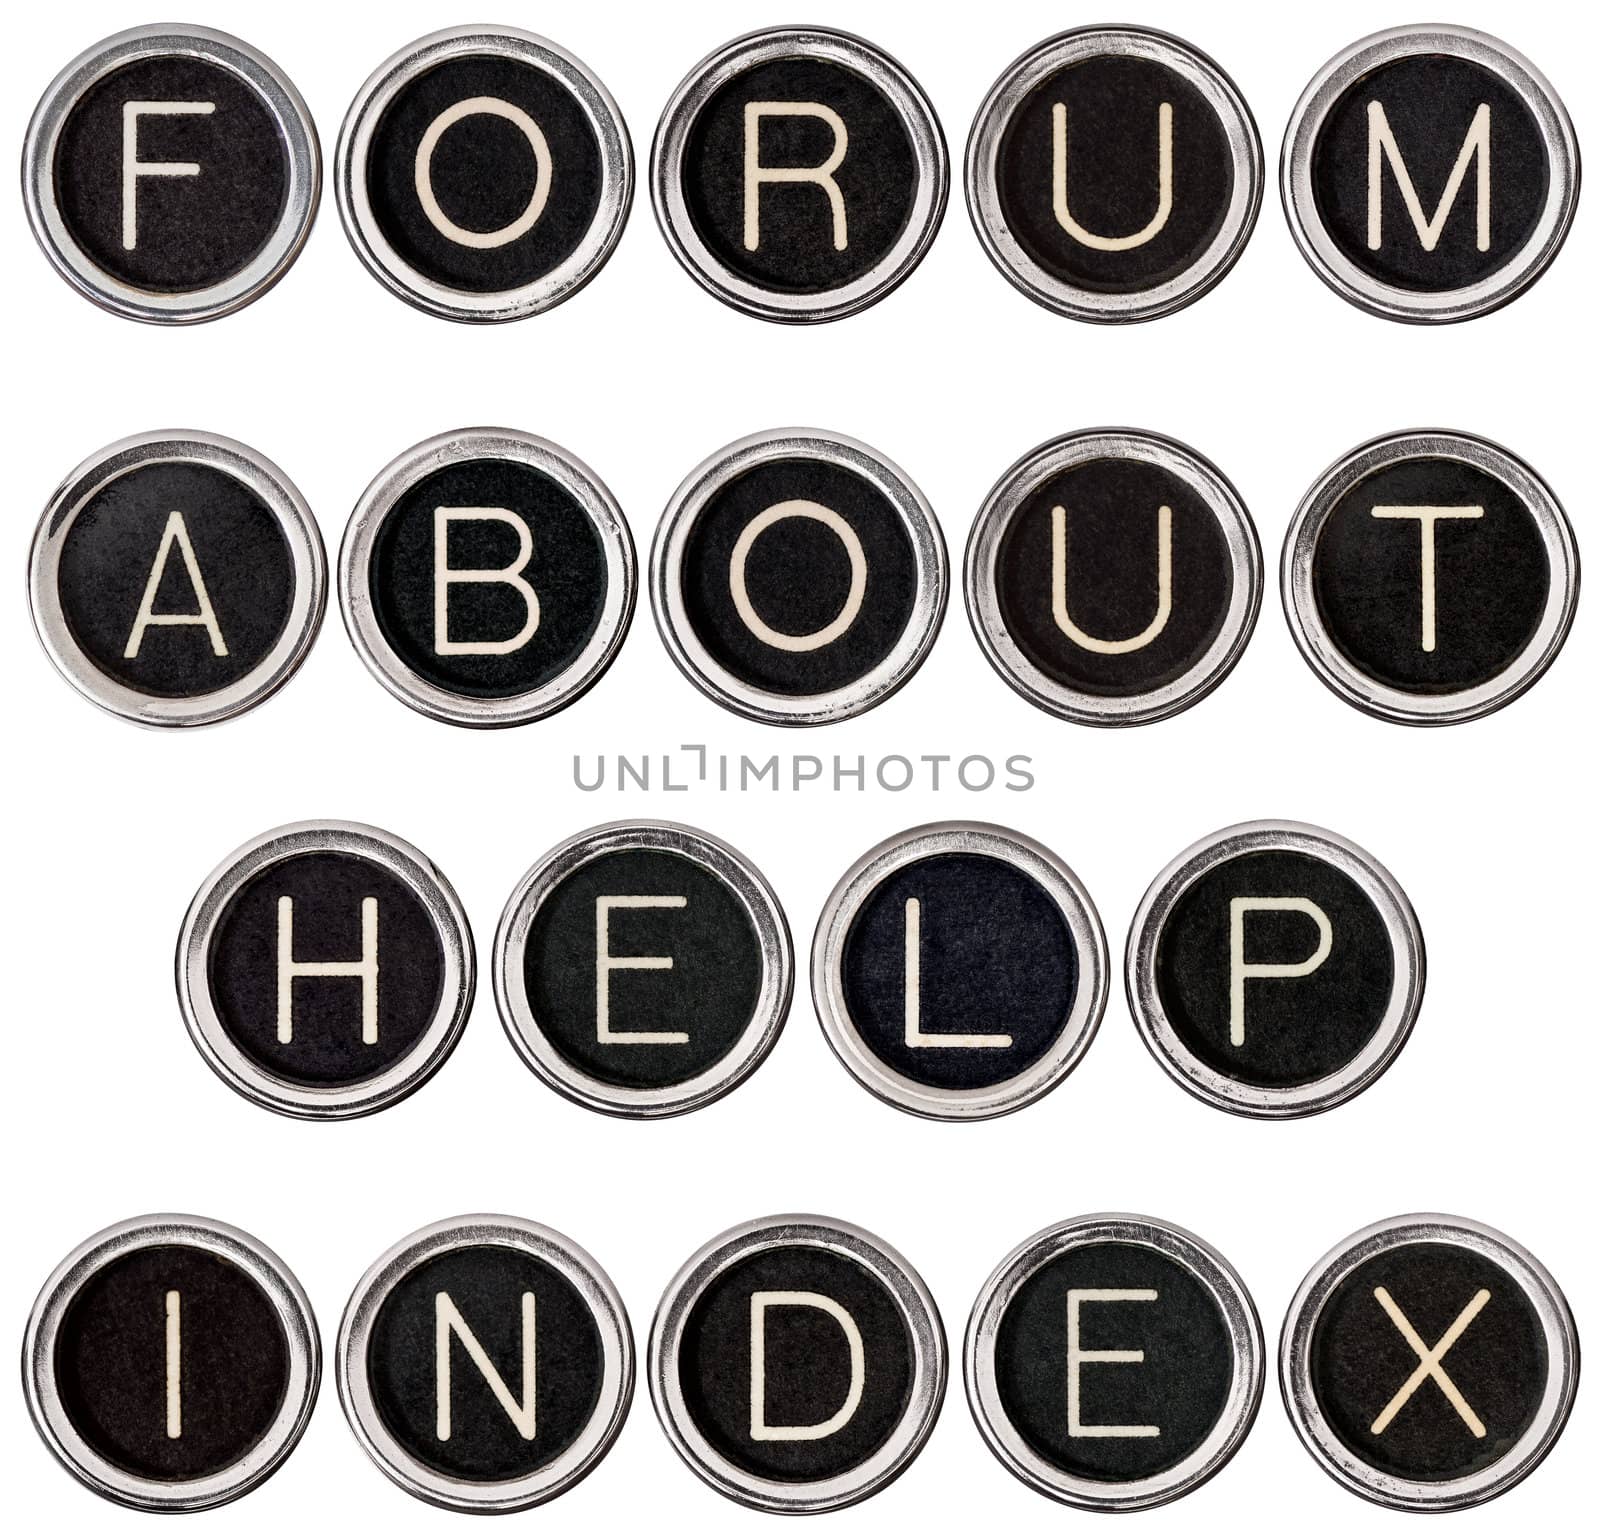 Forum, About, Help and Index banners formed from vintage typewriter keys. Isolated on white and includes clipping path. Each key photographed separately for best focus.
